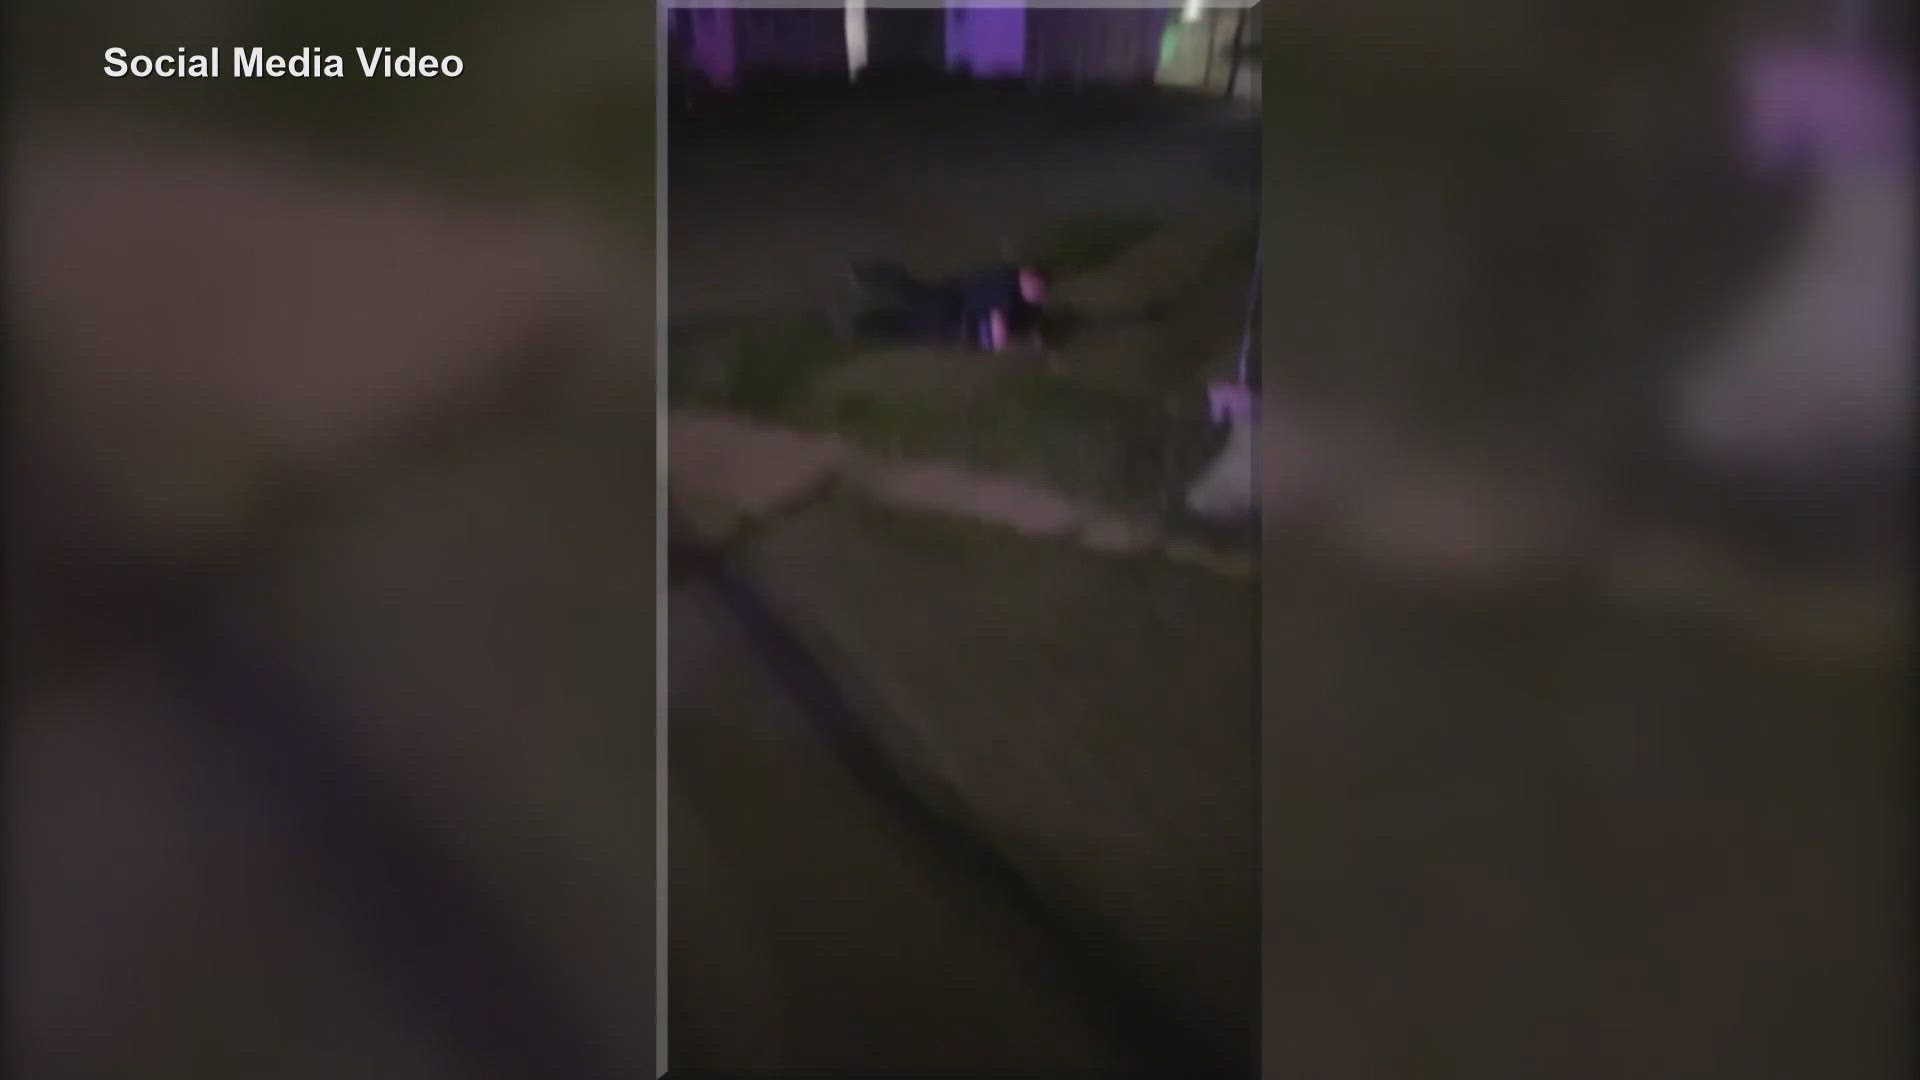 Video shows the boy being chased by Utica police on Friday. An officer throws him to the ground and then shoots him.